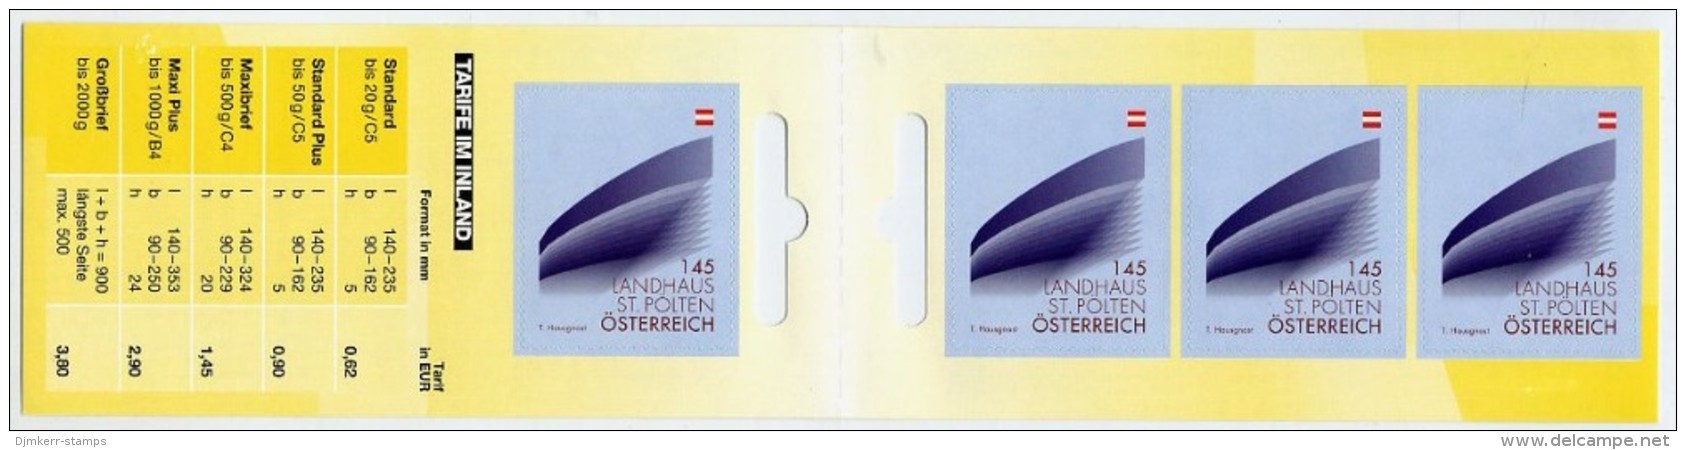 AUSTRIA 2013 Landmarks  Definitive 145 C. Retail Pack With 4 Stamps.  Michel MH 0-25 (3096) - Unused Stamps